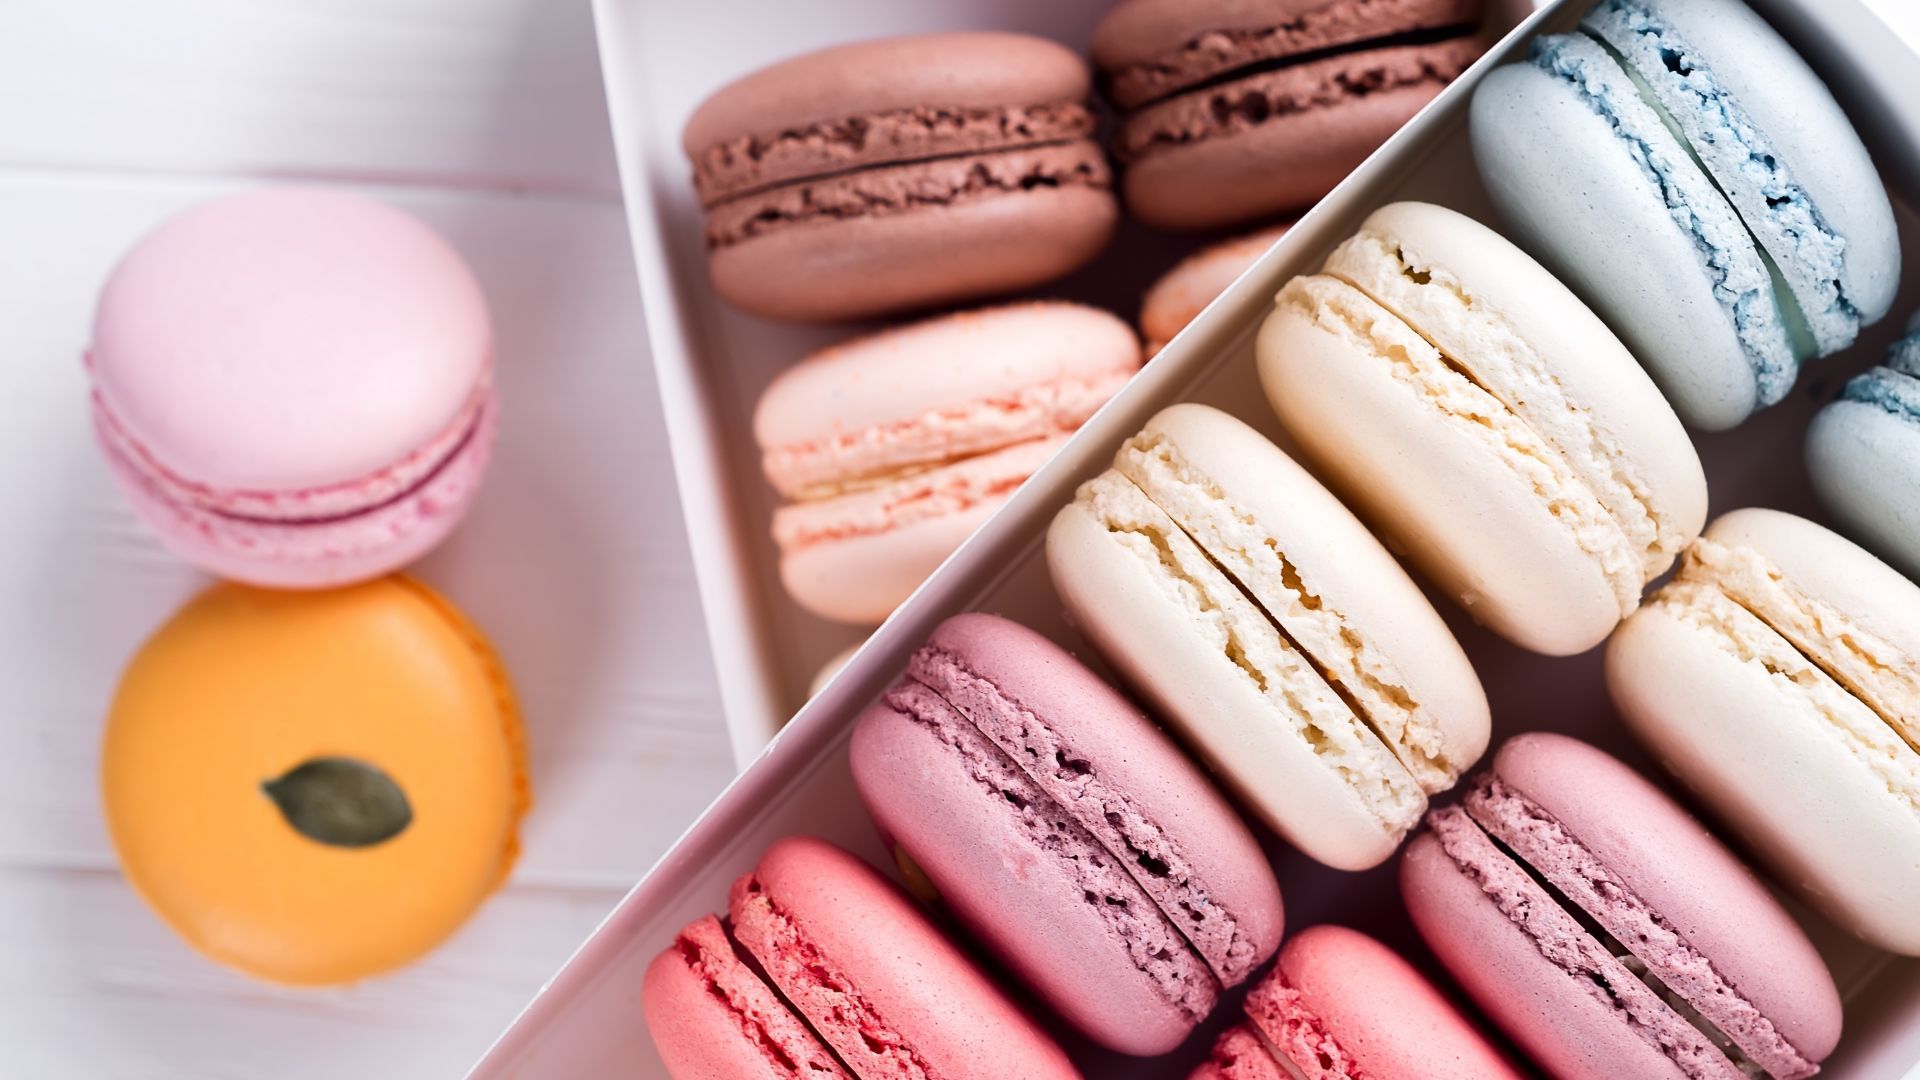 Desktop wallpaper yummy and testy macarons, food, macaron box, HD image, picture, background, 18238a